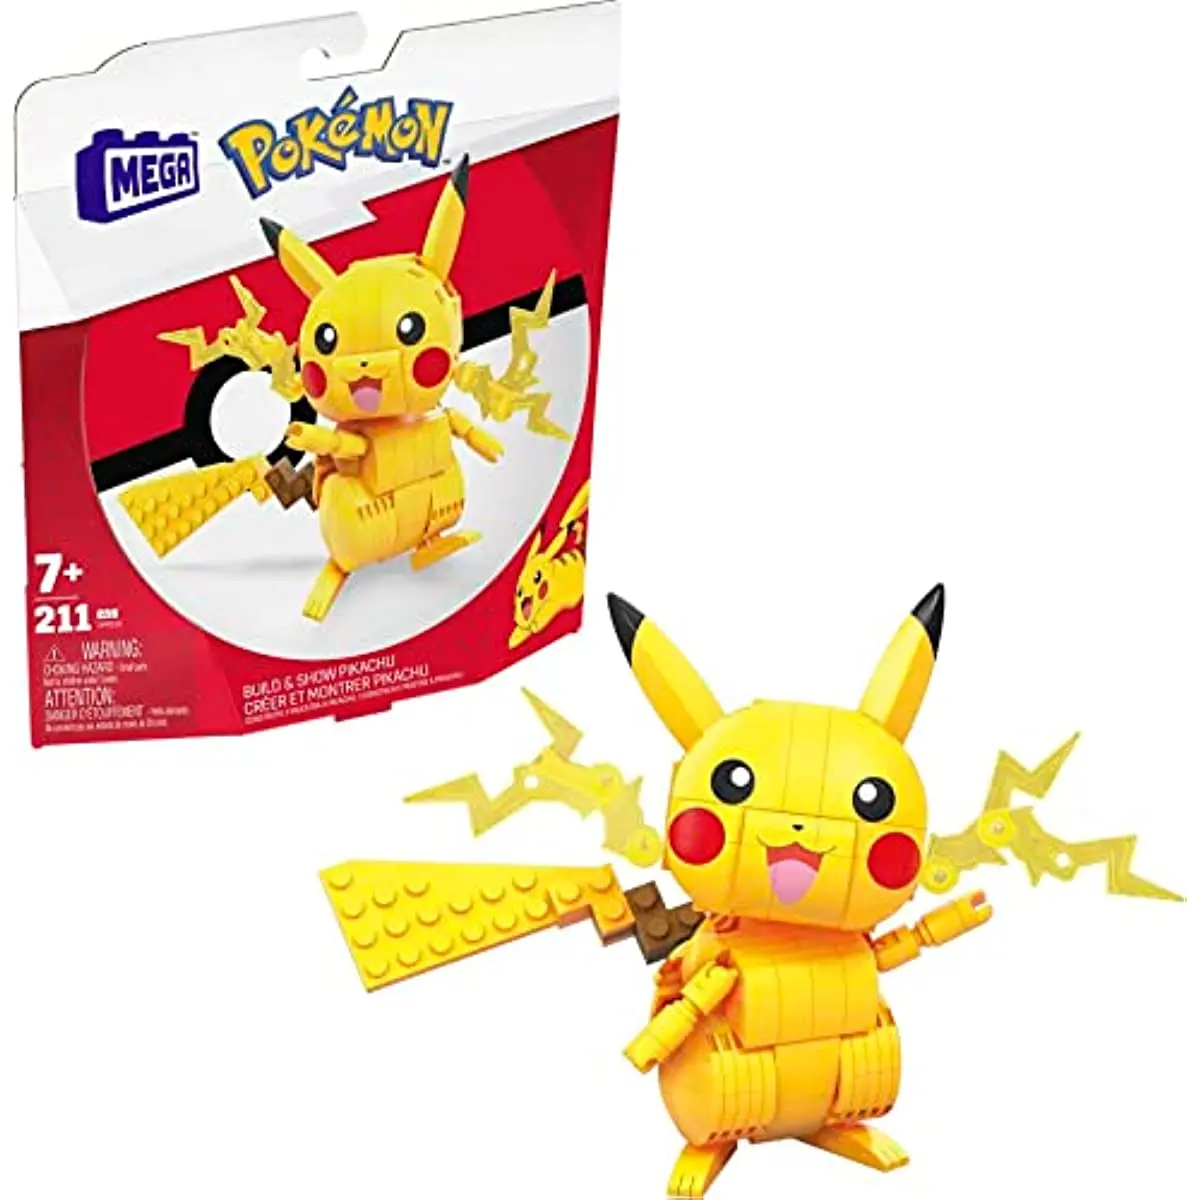 

MEGA Pokémon Action Figure Collectible Building Toy Poseable 4 Inch Pikachu Officially Licensed Collectible for Display